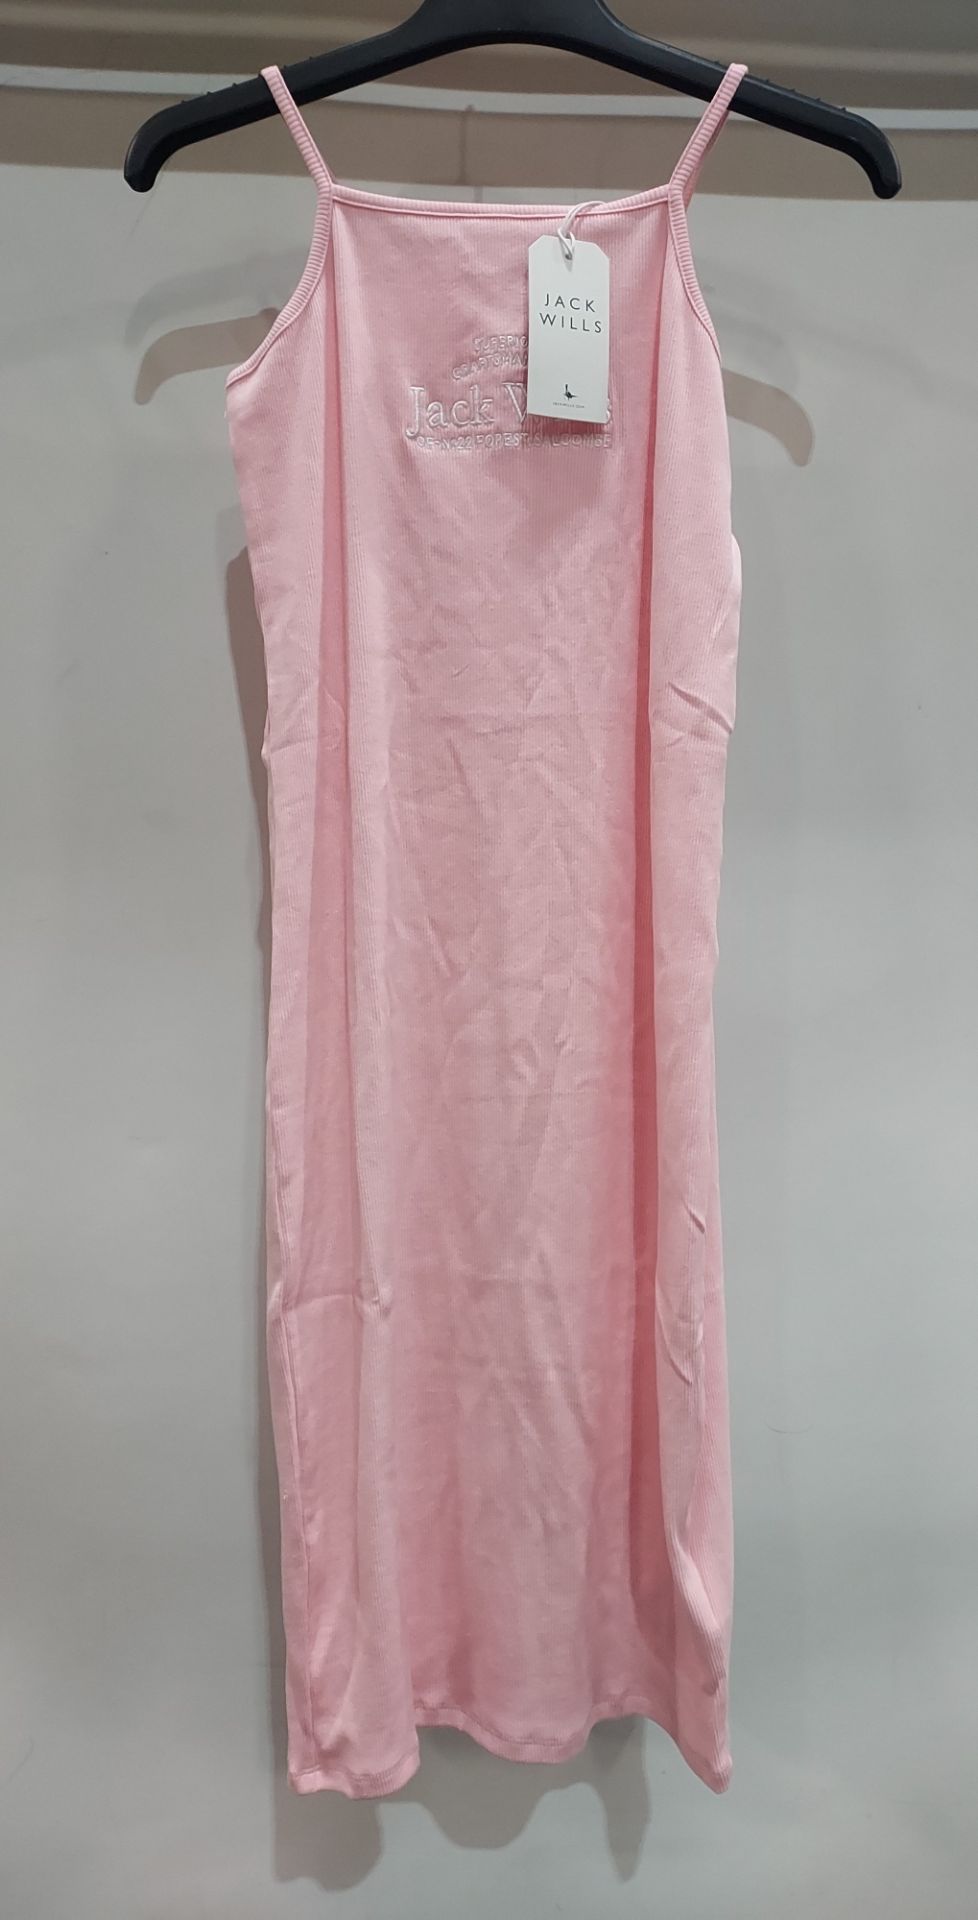 22 X BRAND NEW KID'S JACK WILLS PINK NIGHTIES SIZES 8 FOR 9-1O YEAR OLD , 11 FOR 12-13 YEAR OLD ,